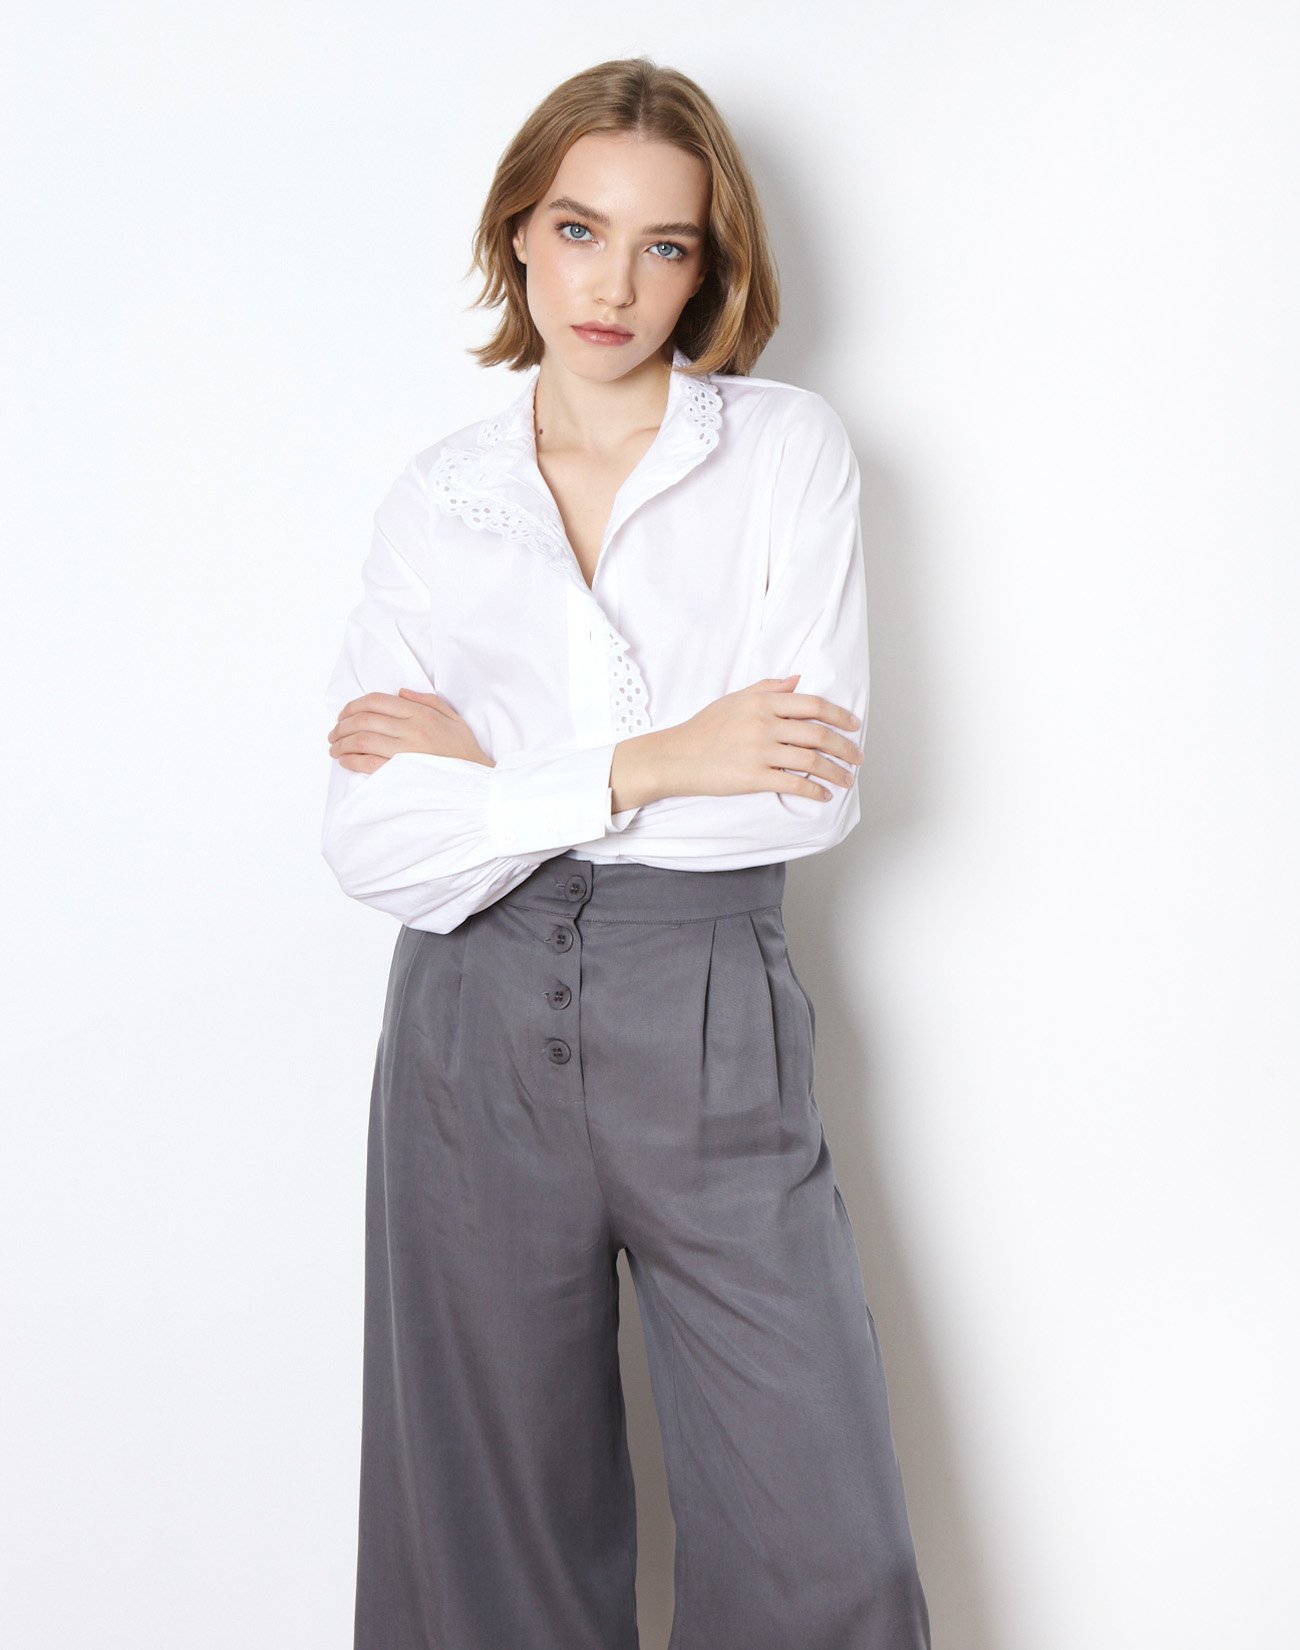 Culottes with buttons